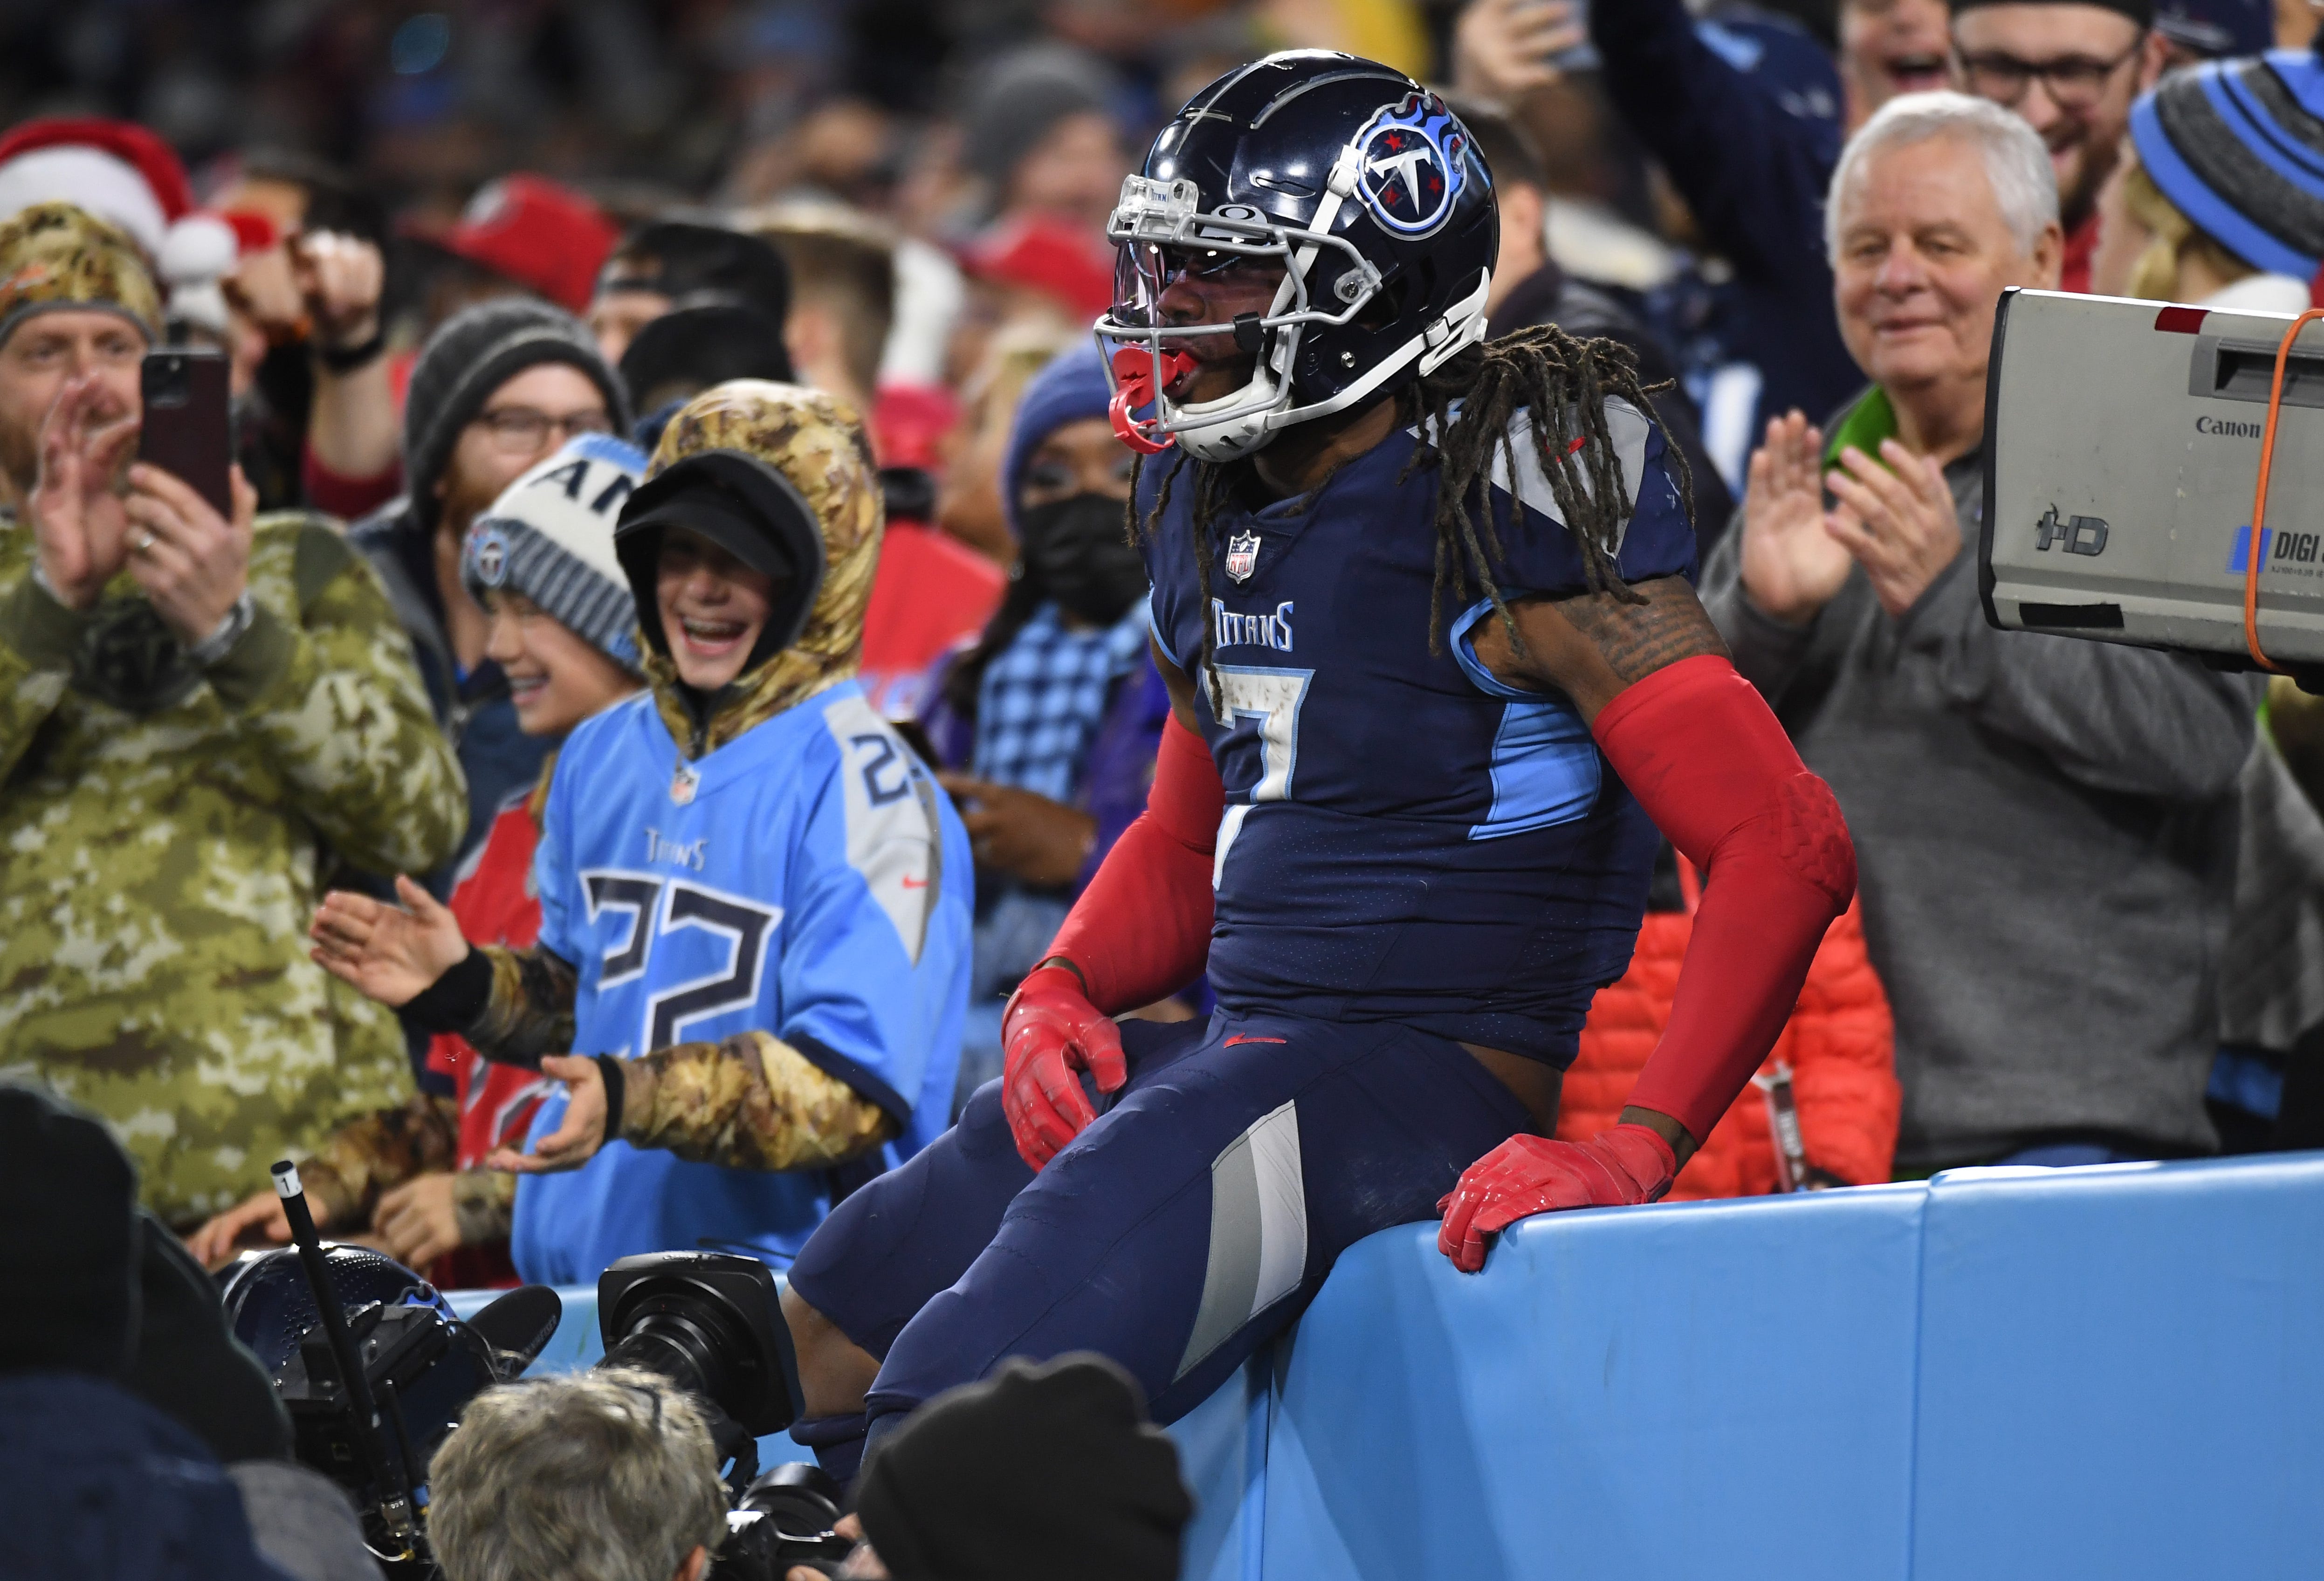 Titans edge 49ers on late field goal to close in on playoff spot, division title